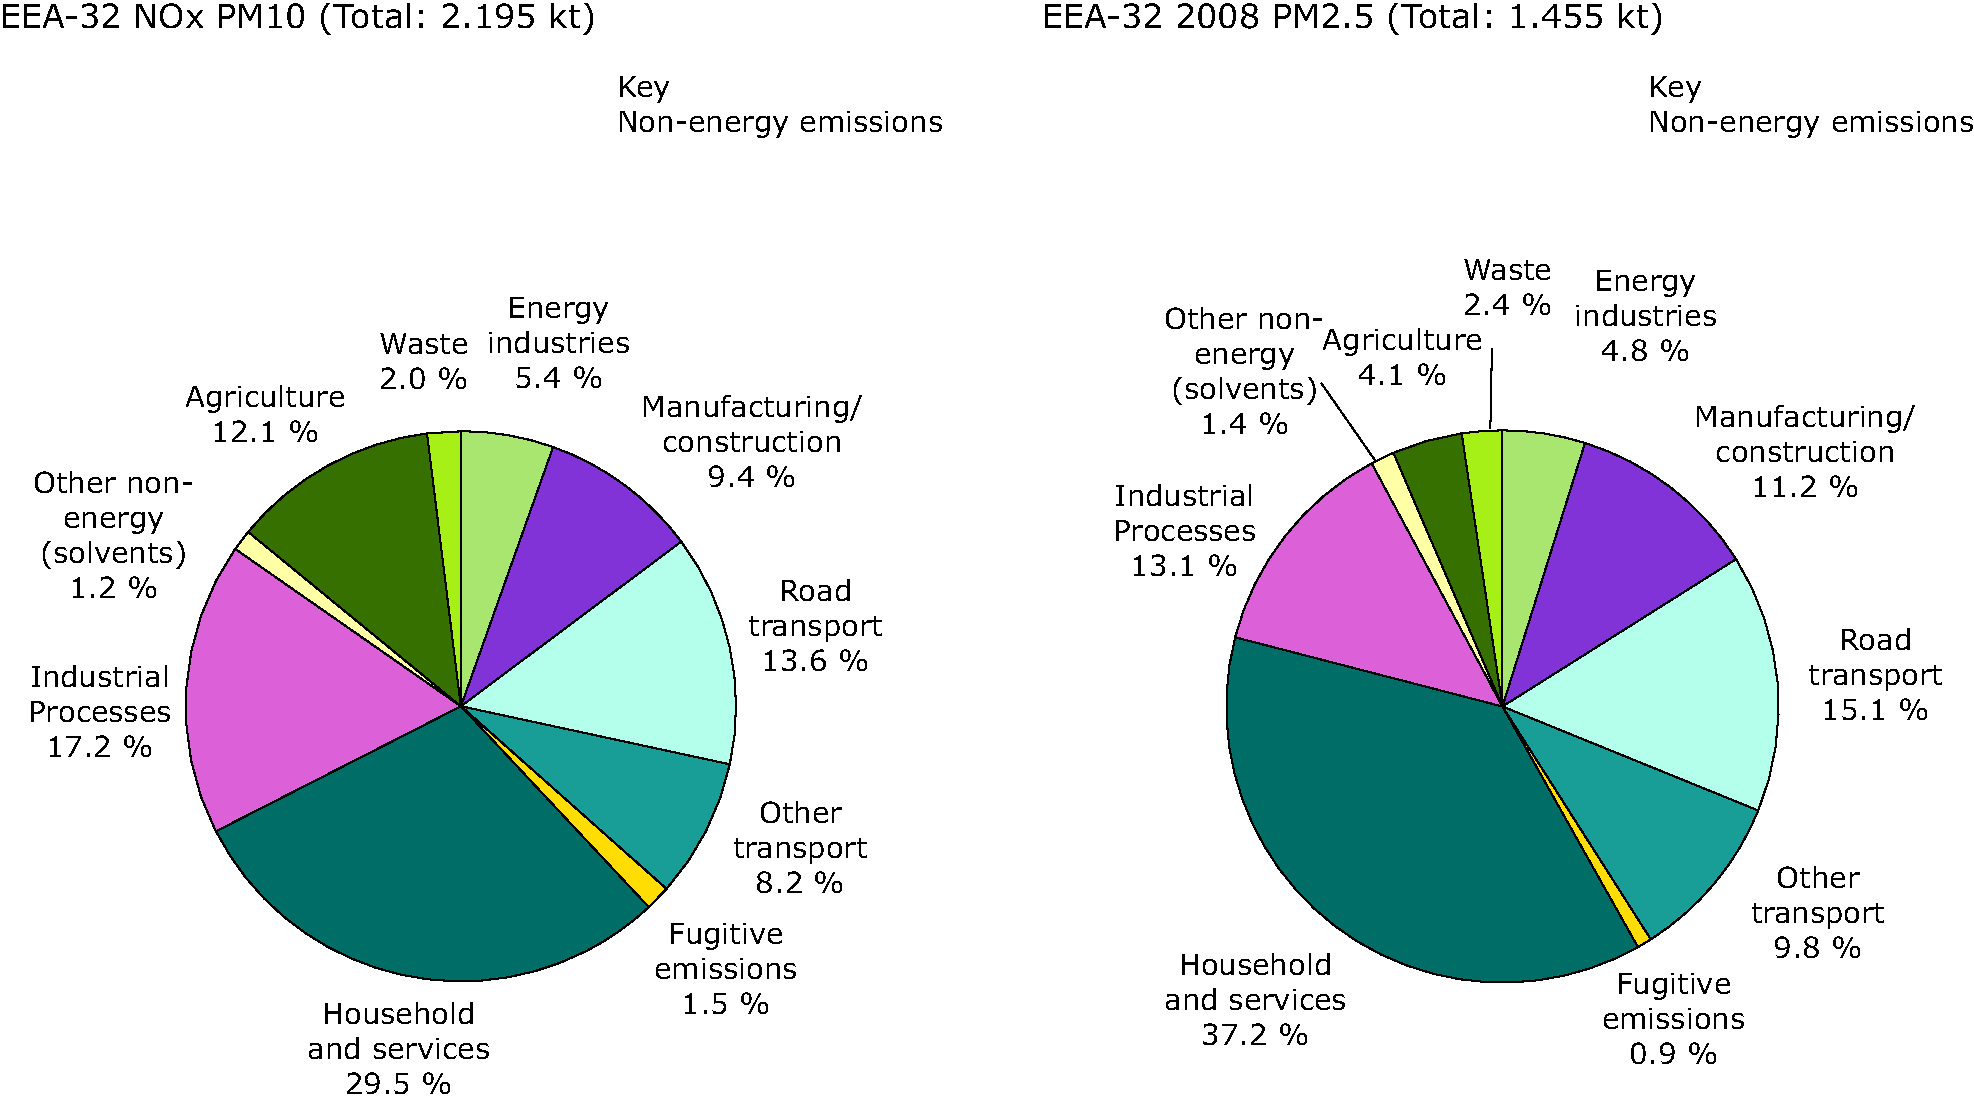 Contribution of different sectors (energy and non-energy) to total emissions of PM10 and PM2.5, 2008, EEA-32